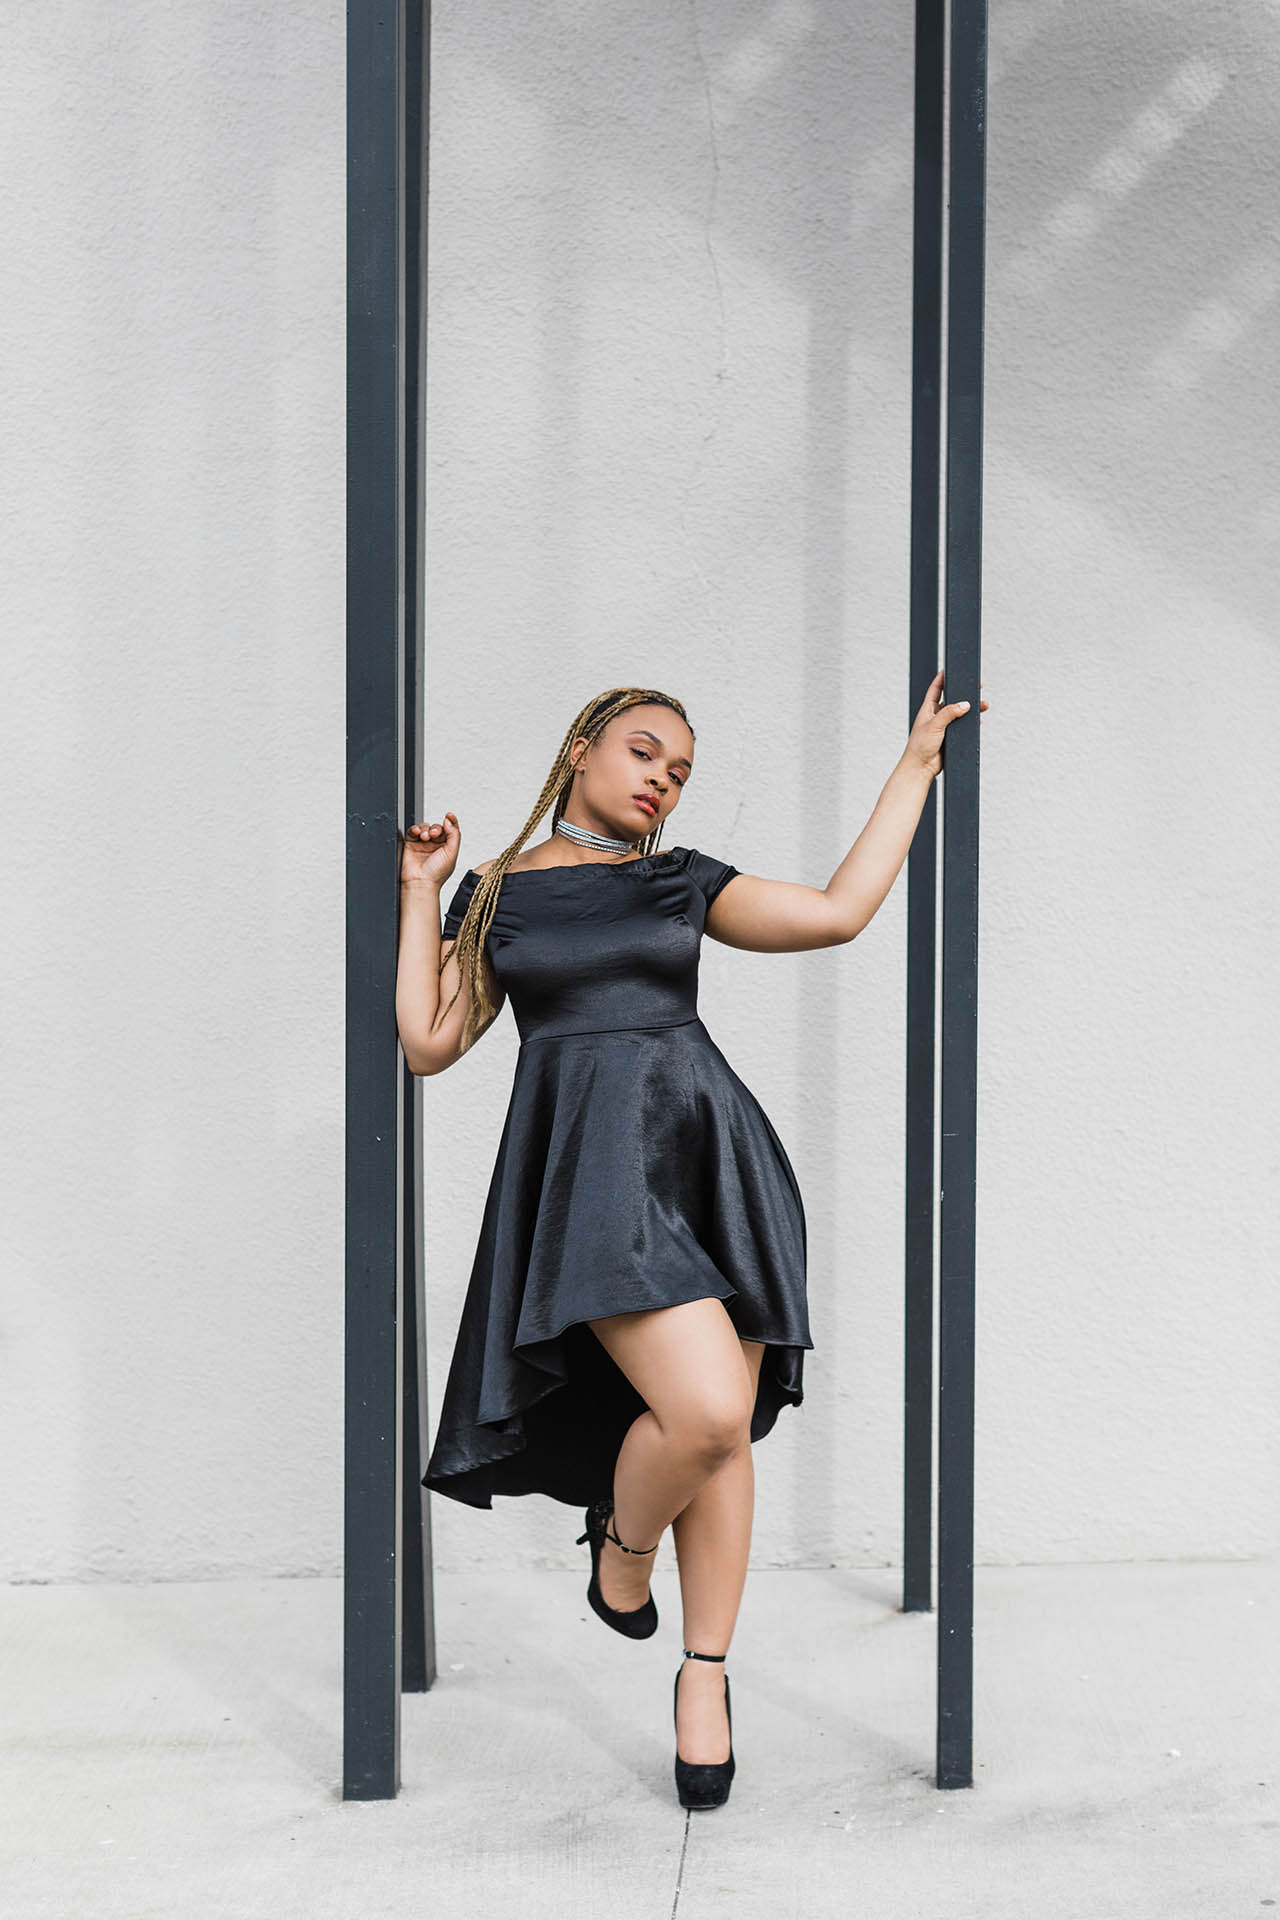 Inclusive fashion photos; photo of an African American woman in a black dress posing alluringly between a black metal frame in front of a white background